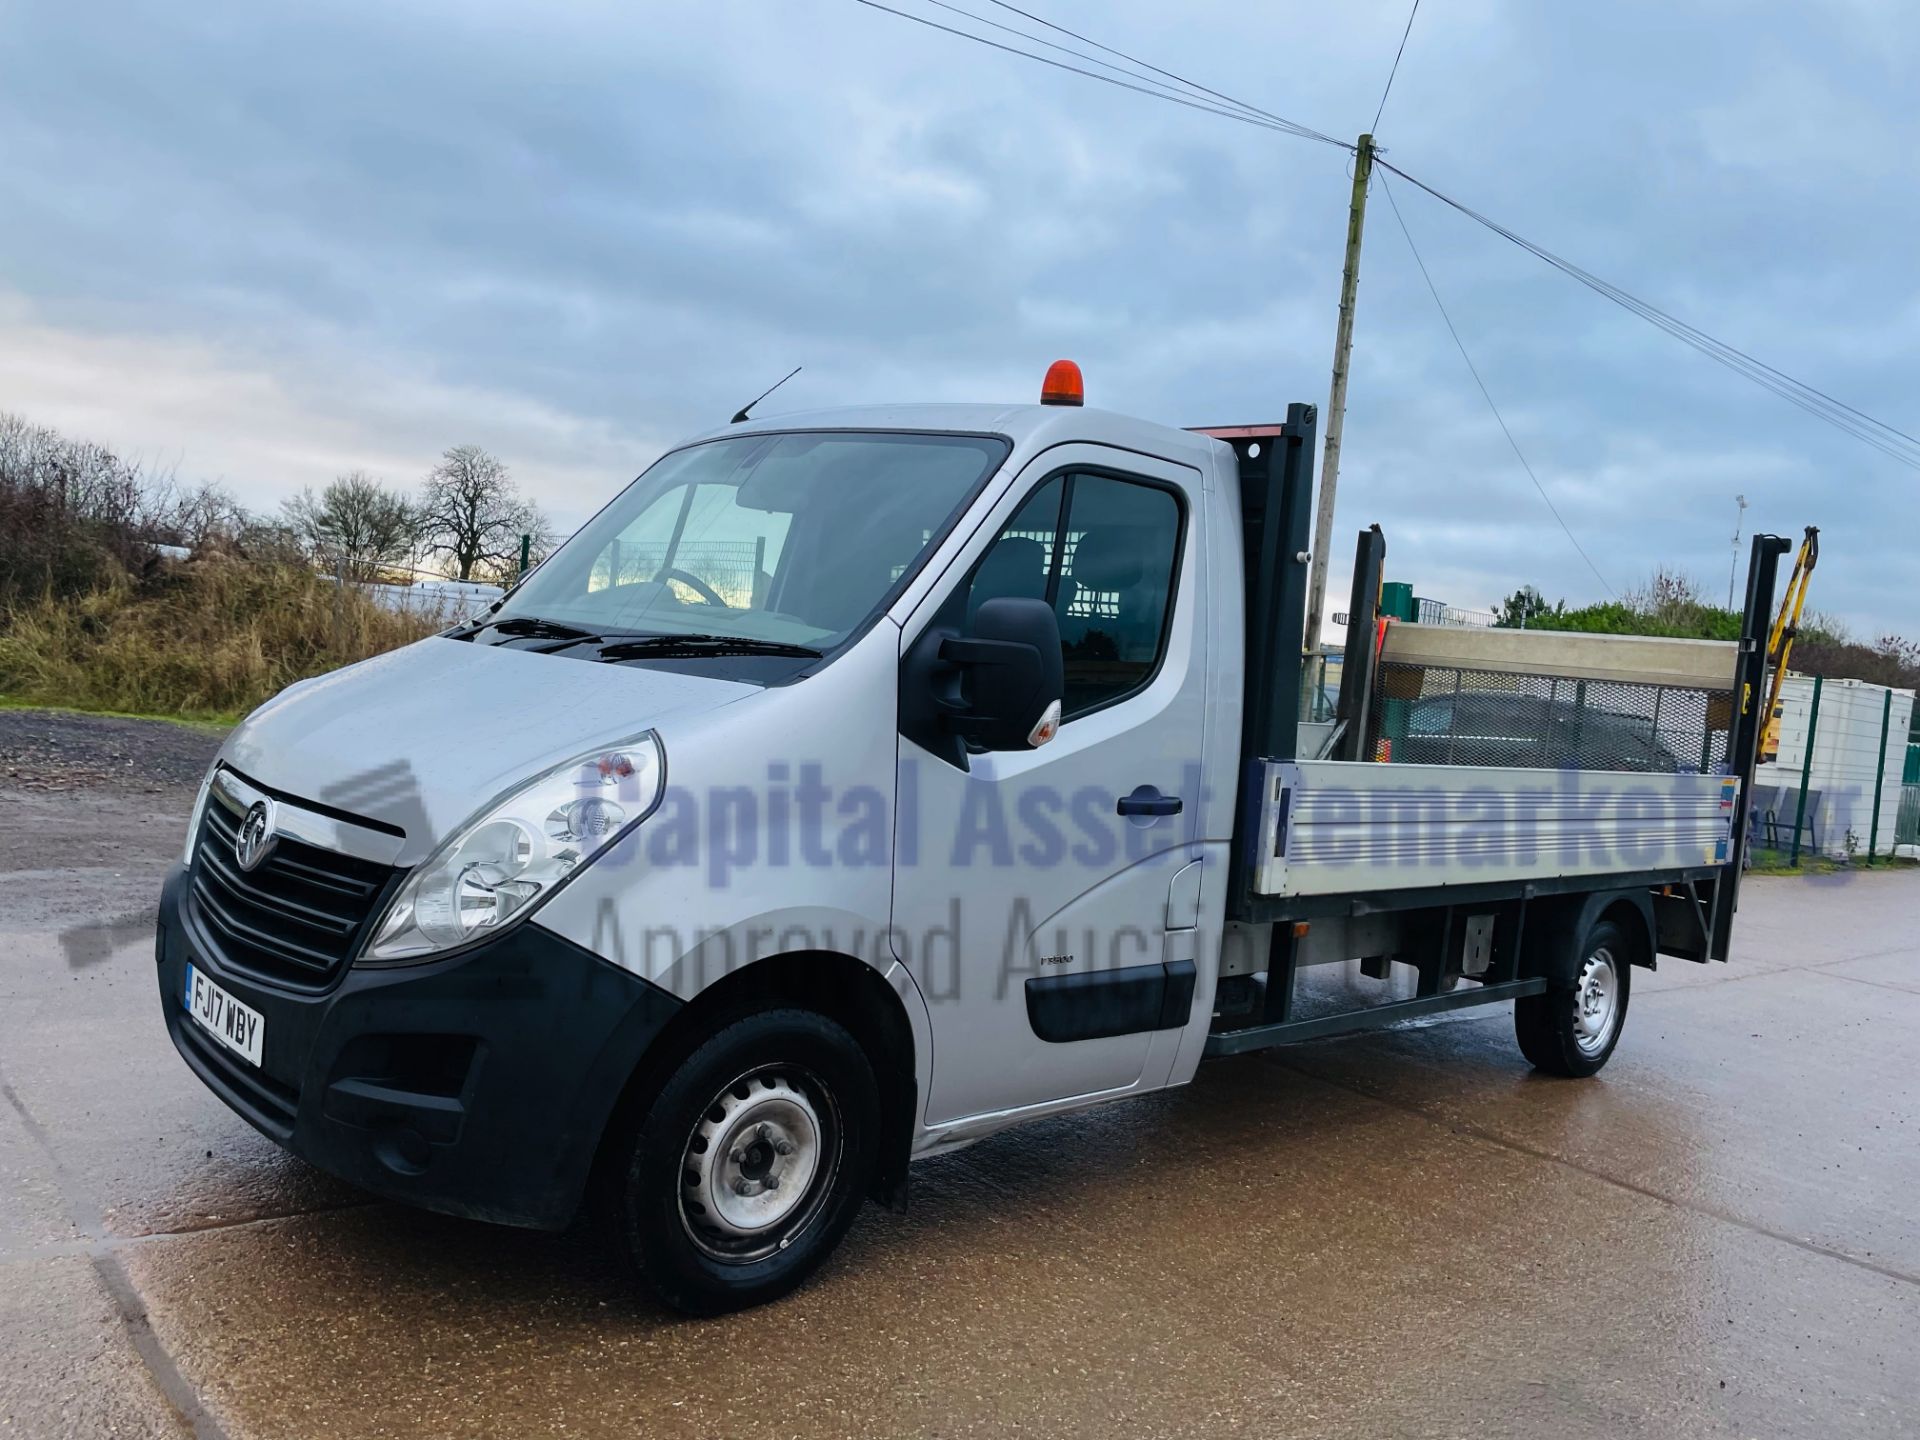 (On Sale) VAUXHALL MOVANO F3500 *LWB - DROPSIDE TRUCK* (2017 - EURO 6) ' 6 SPEED' *A/C* (TAIL-LIFT) - Image 3 of 40